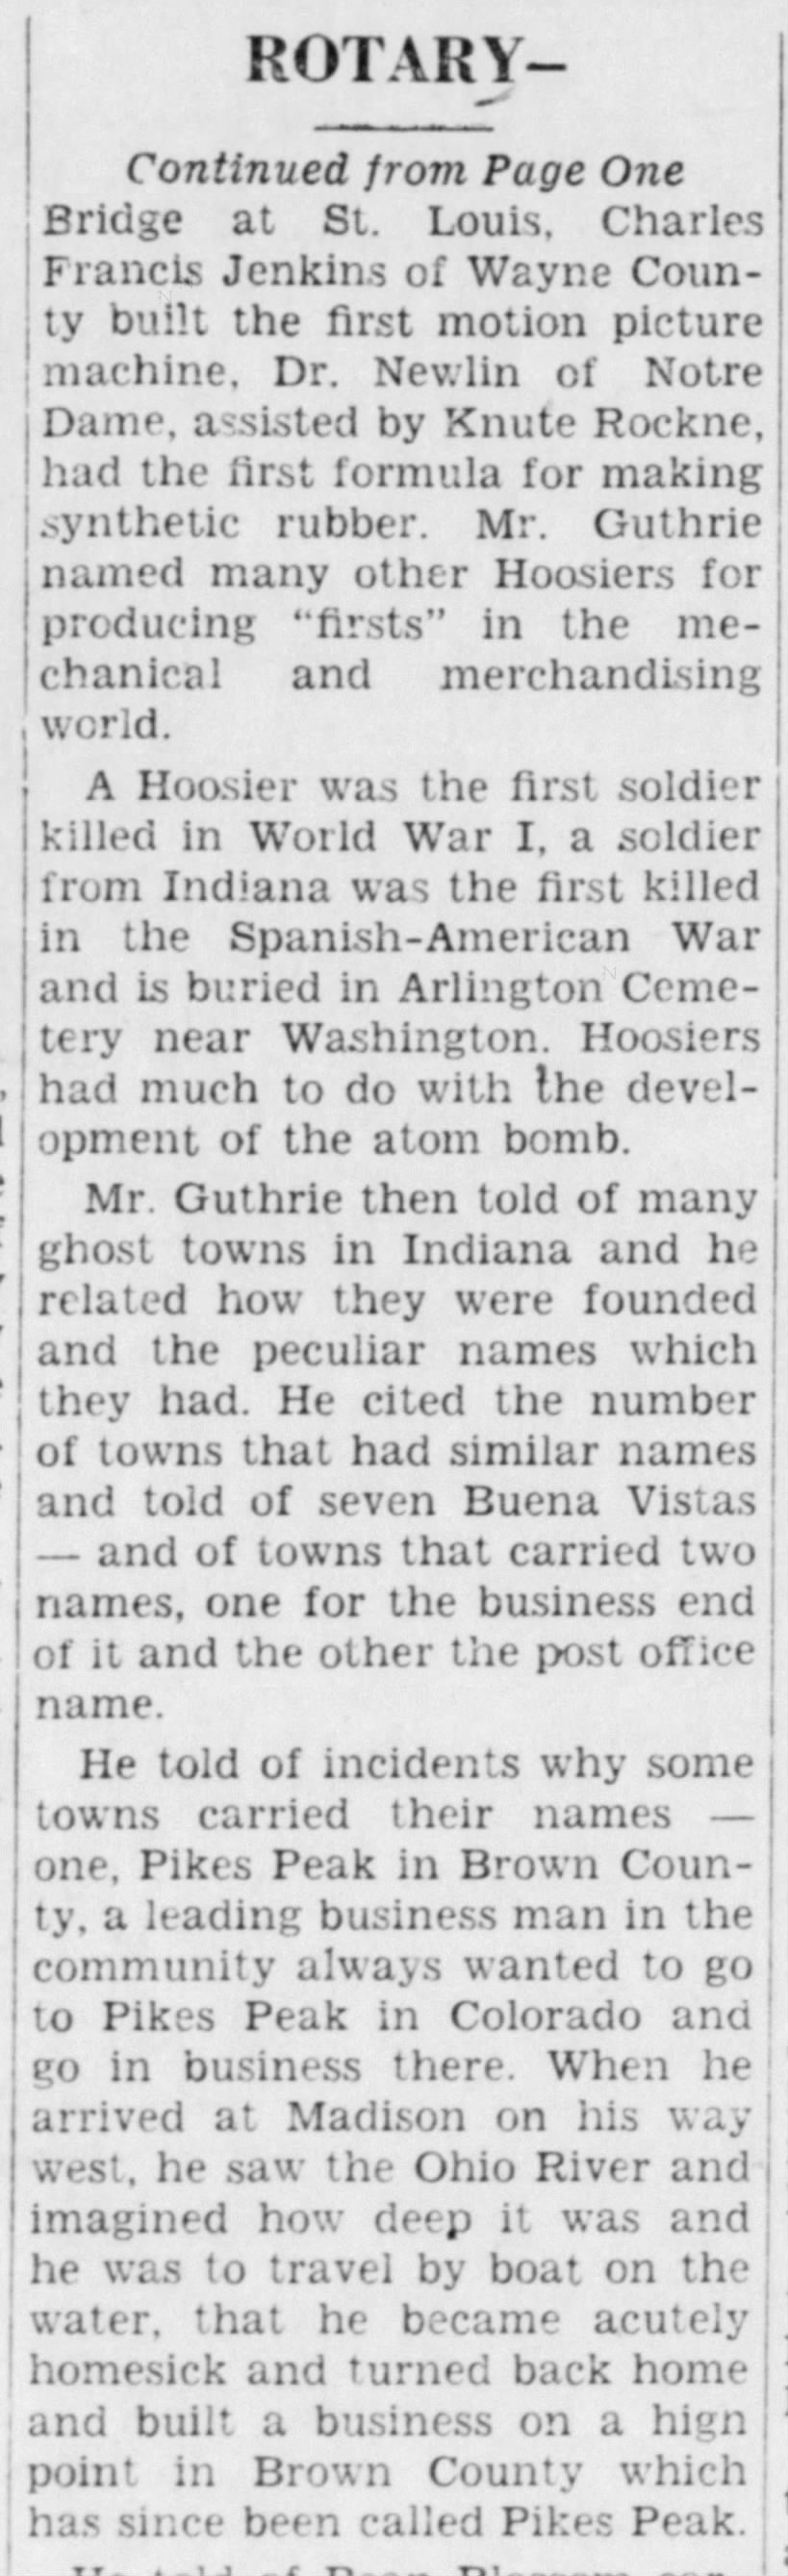 Rushville Republican Tuesday 14 Feb 1950 page 6